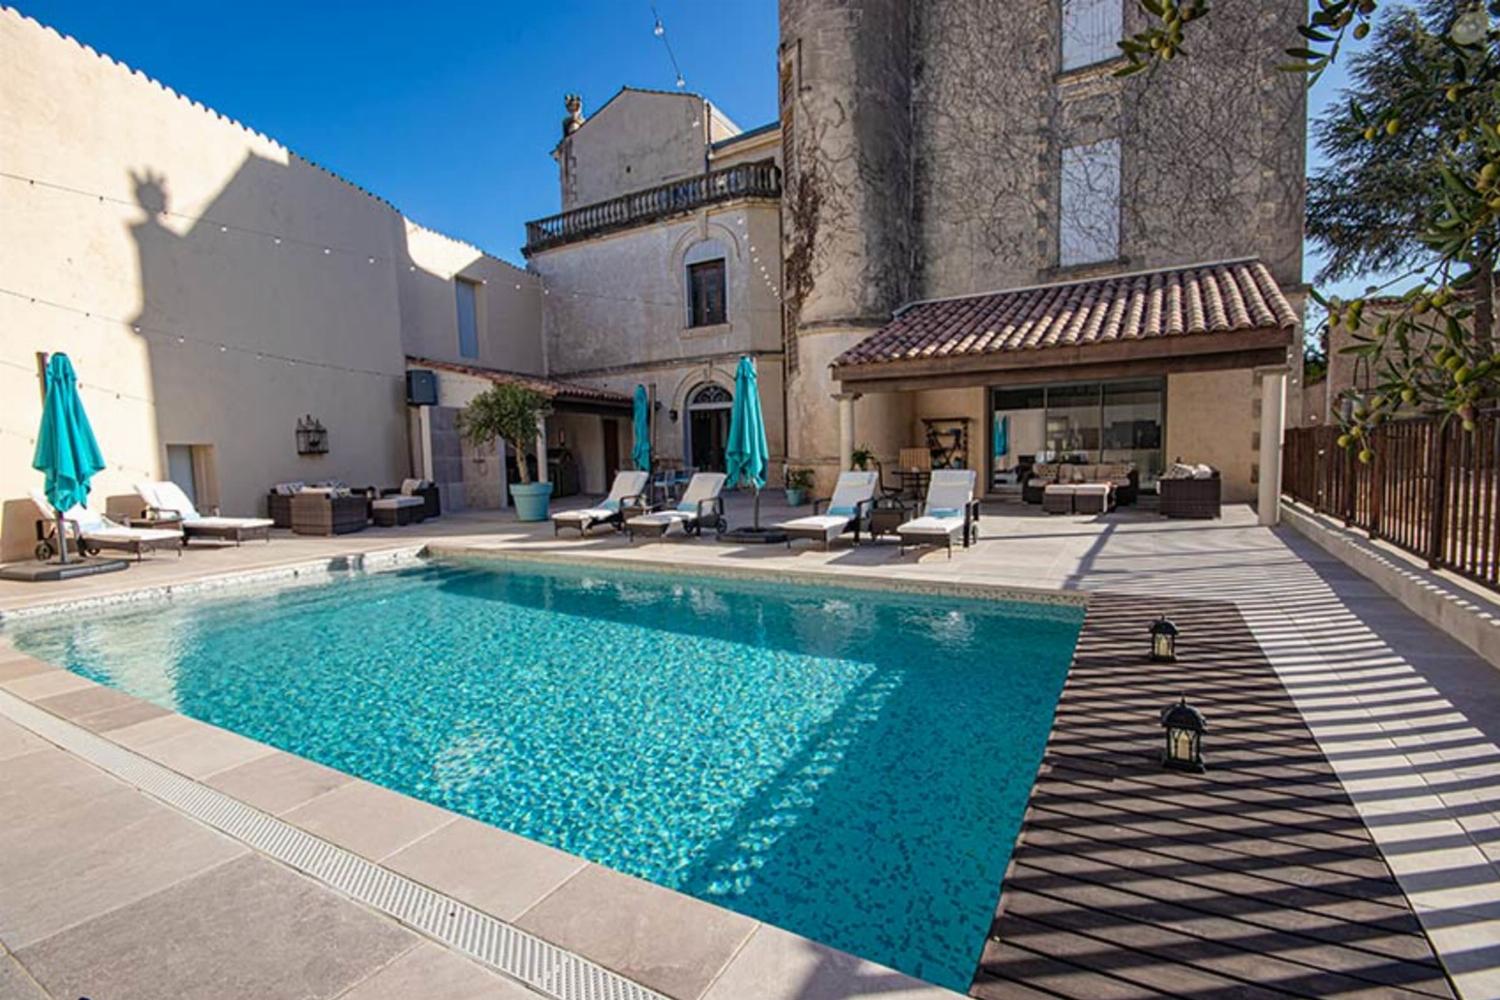 Holiday château in South of France with private heated pool